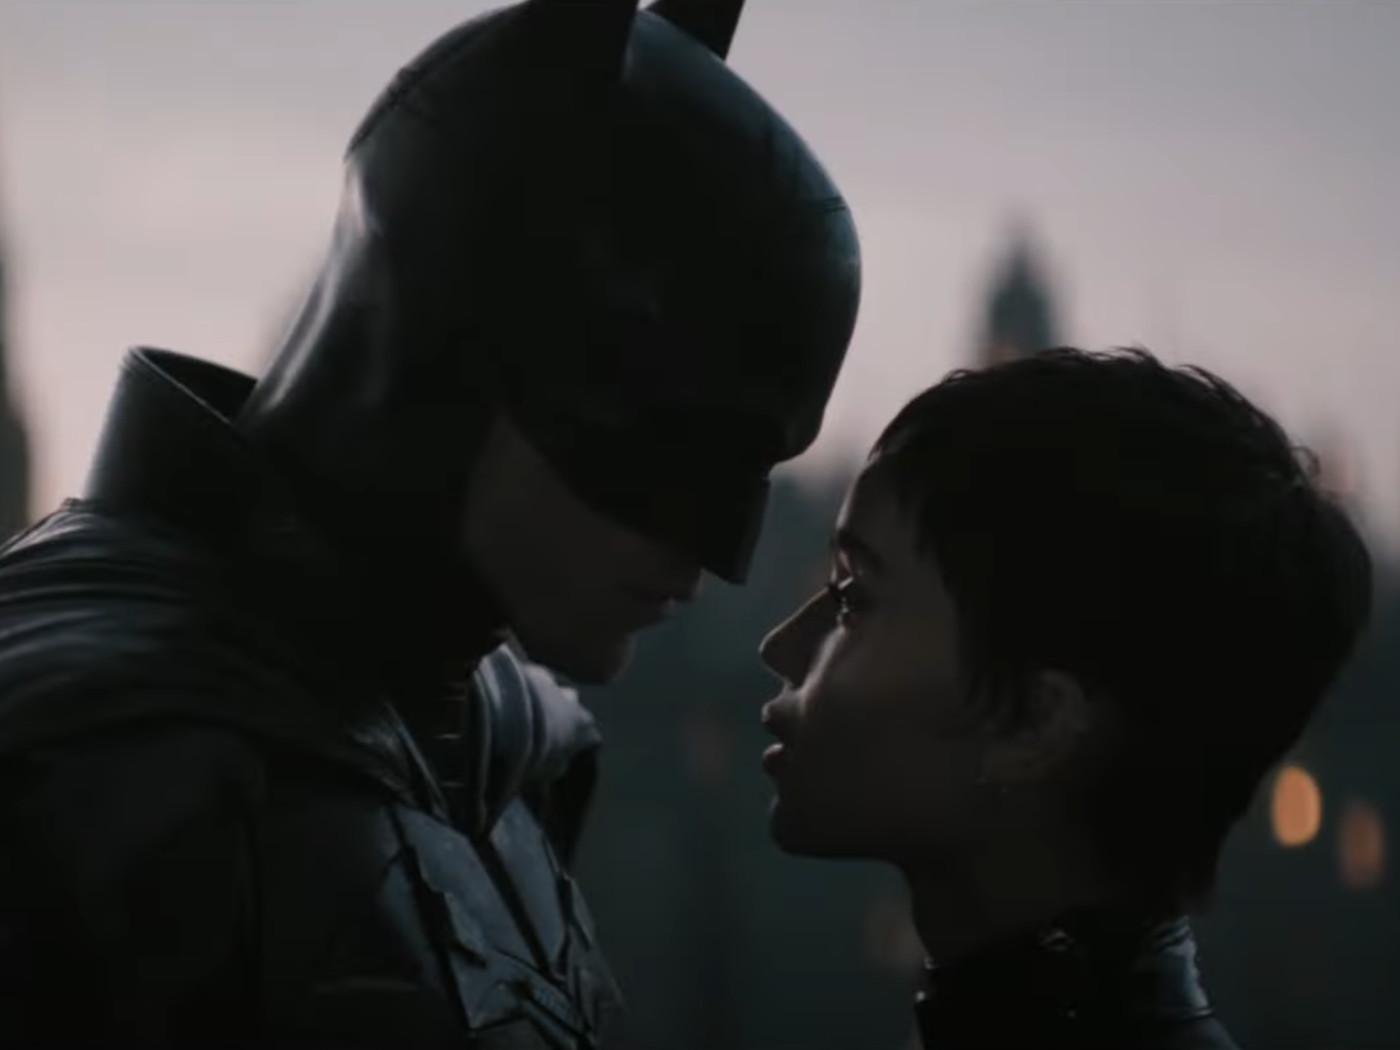 The Batman's “Bat and the Cat” trailer focuses on Catwoman and Riddler